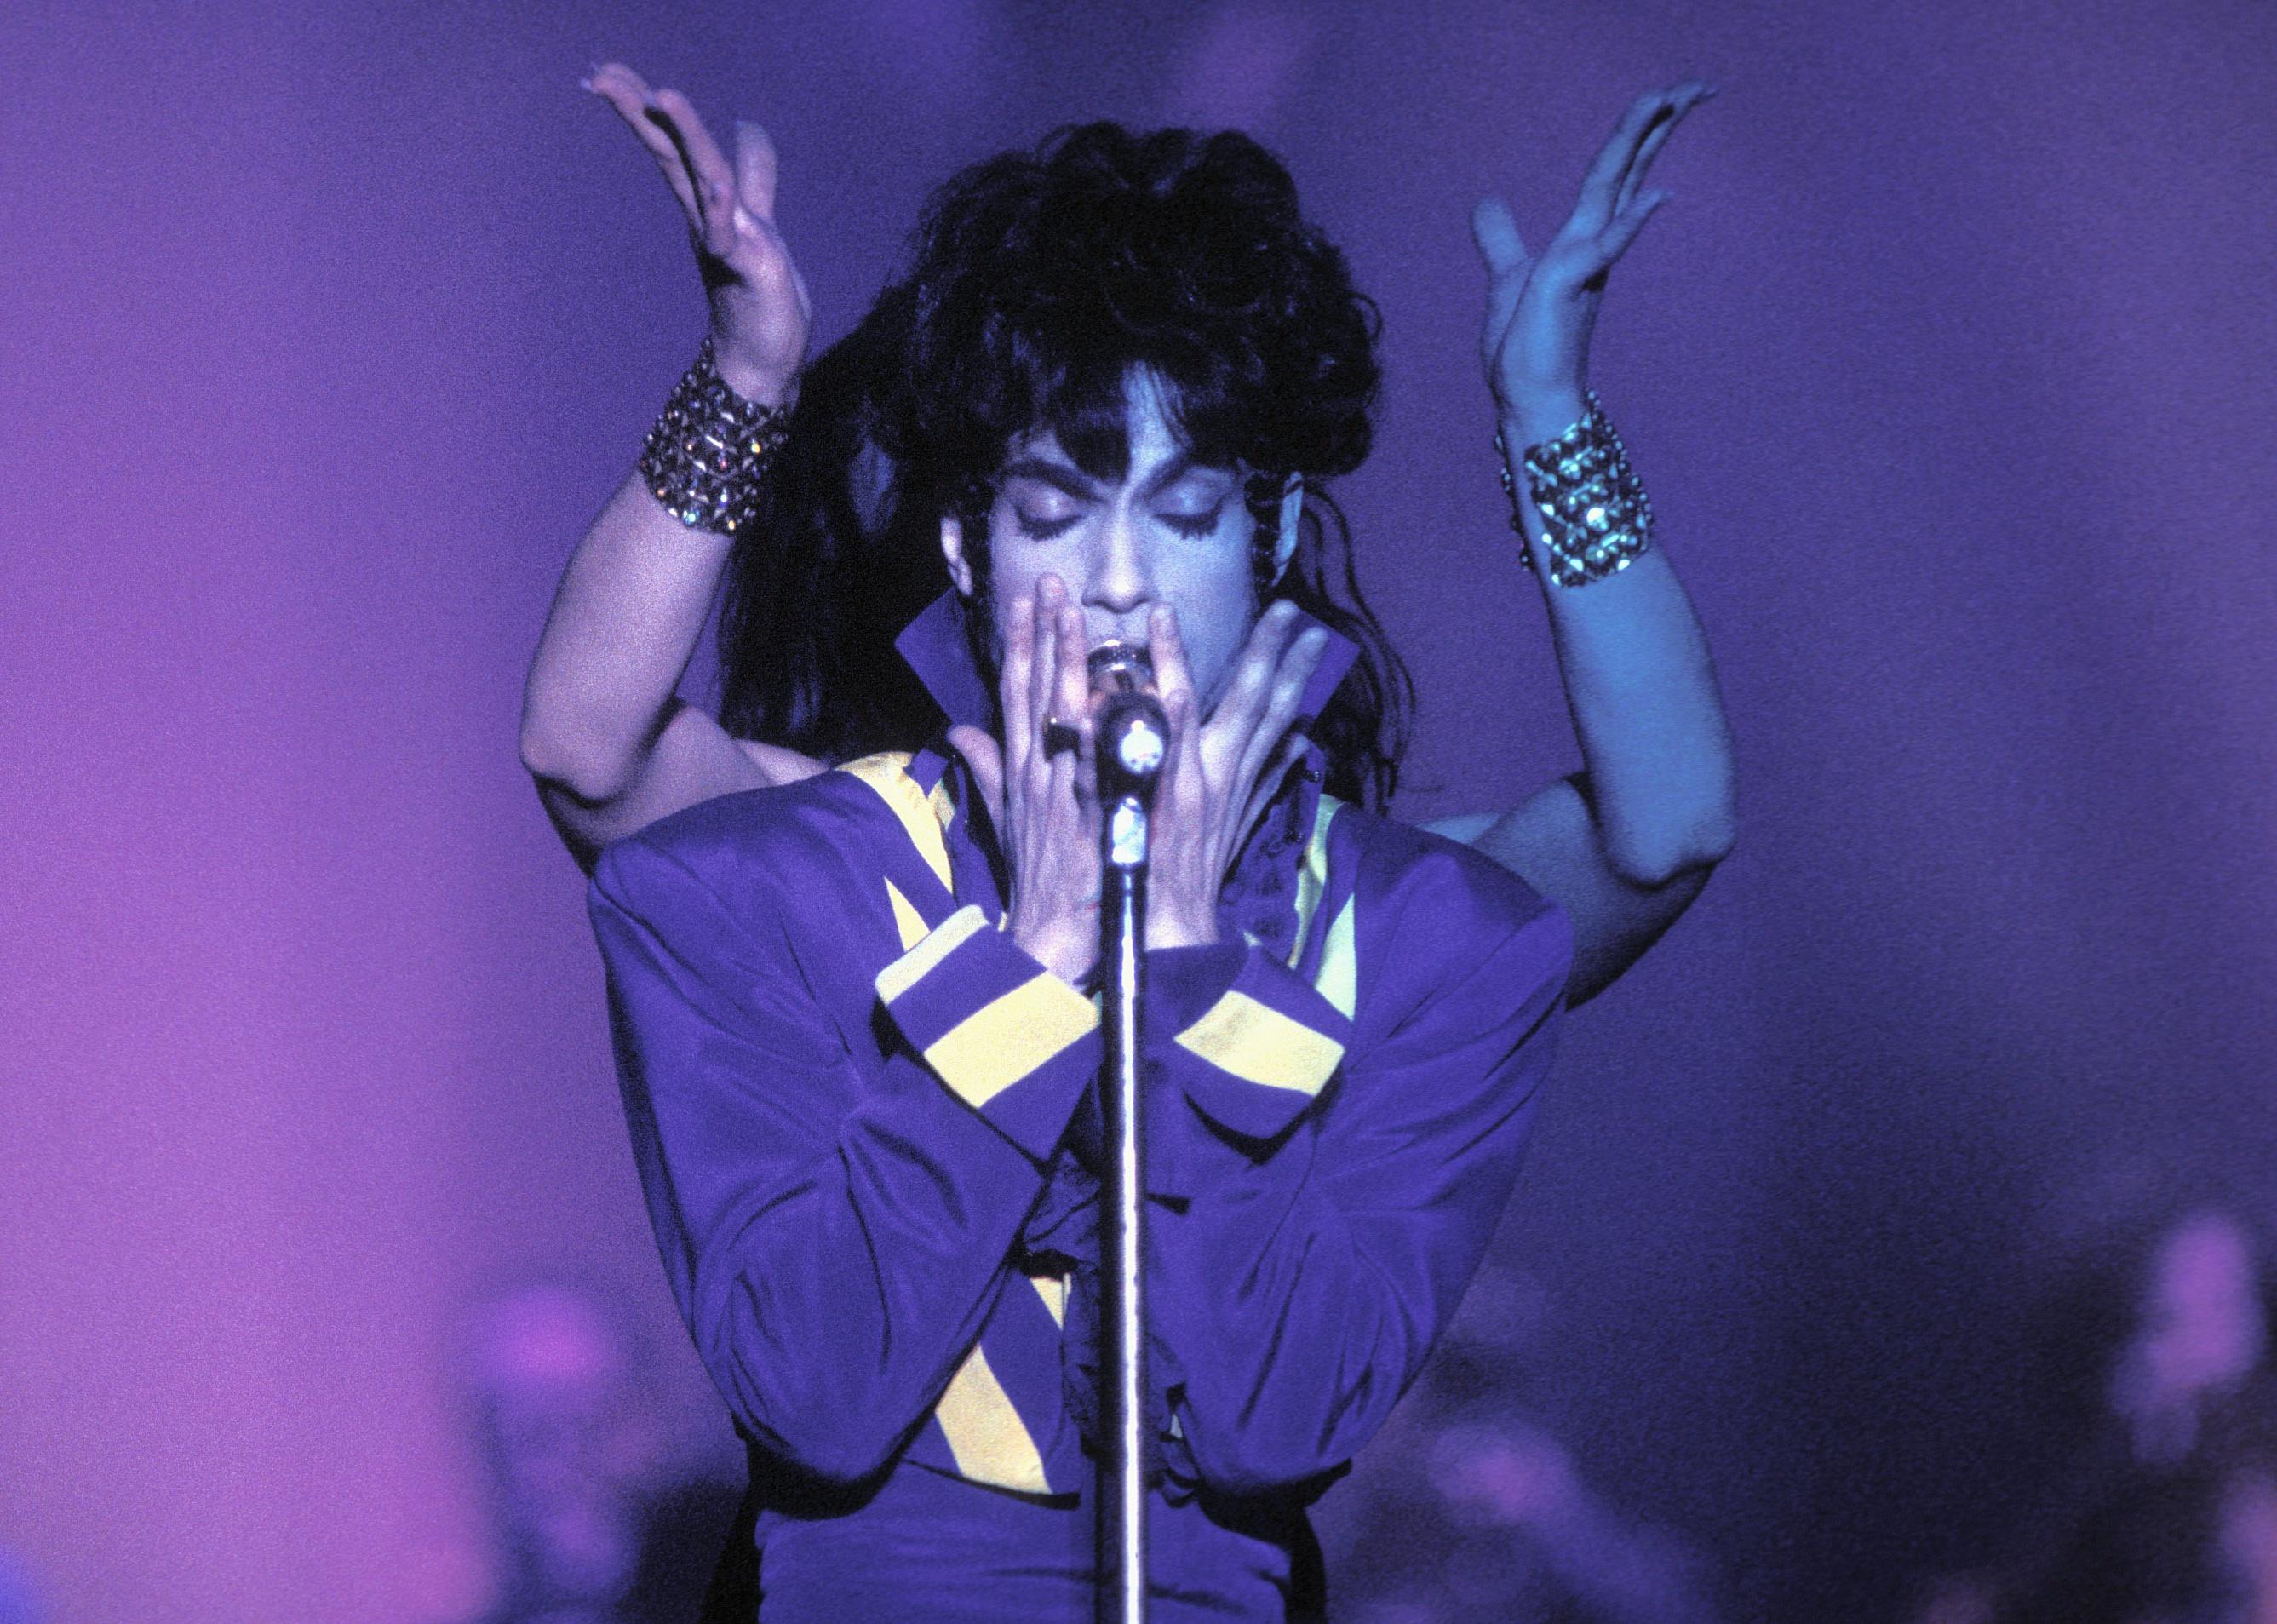 Prince performs on stage on August 9 1993 in Den Bosch.